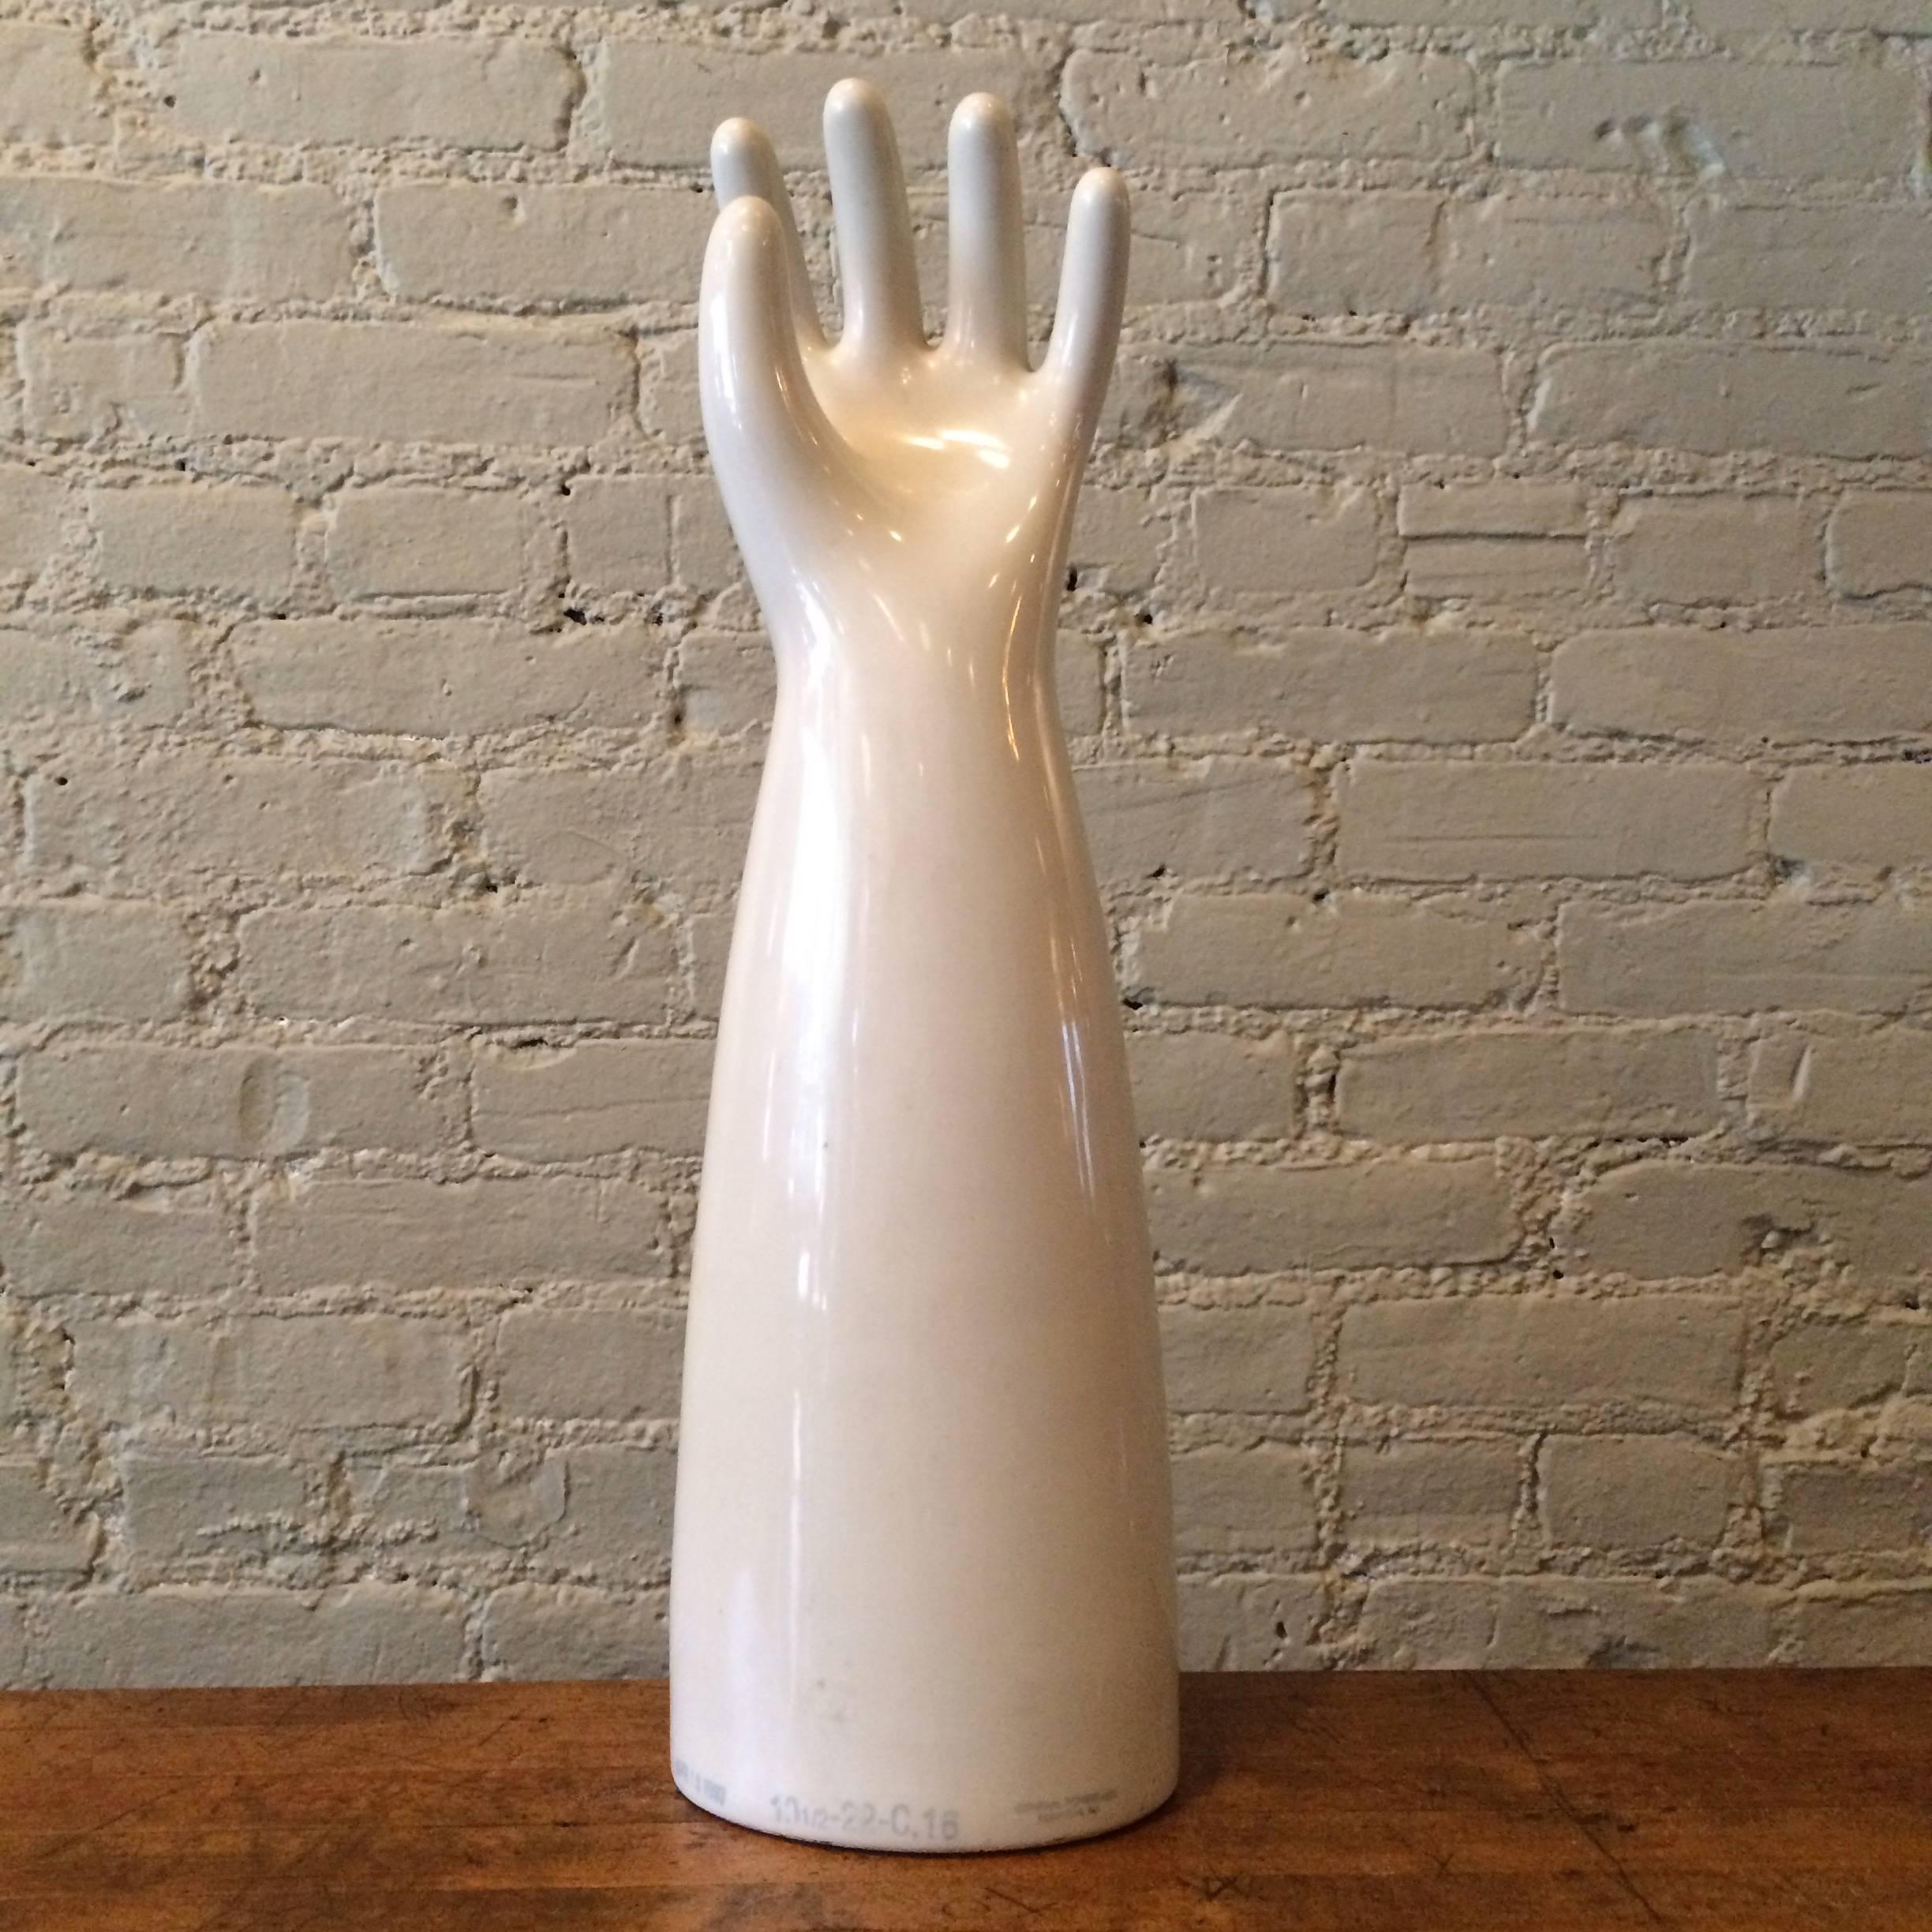 Large, Mid-Century, Industrial, porcelain glove molds for rubber gloves, circa 1940s from 20"-23" in height.